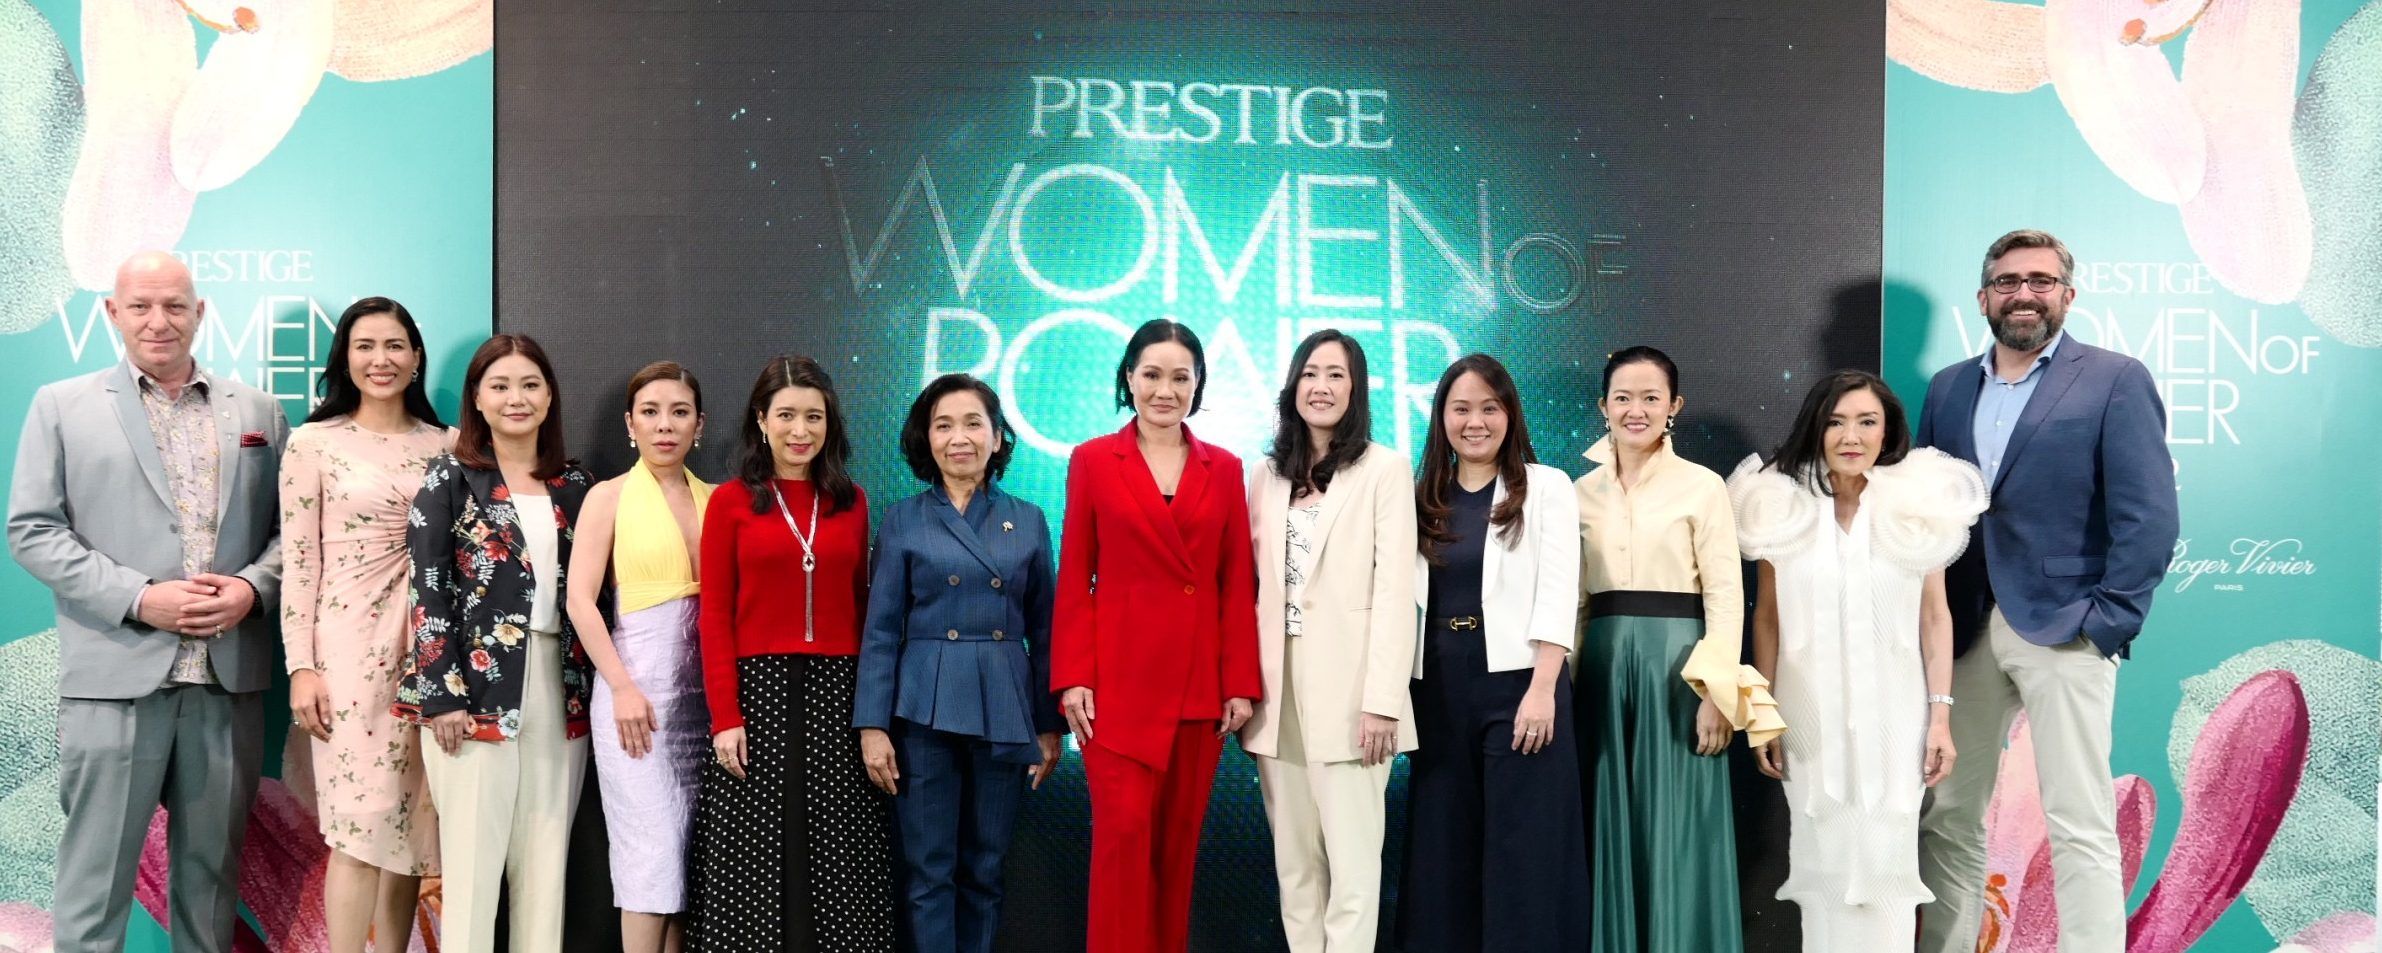 Prestige Thailand Hosts Exclusive Event to Celebrate Inaugural Women of Power Collective  